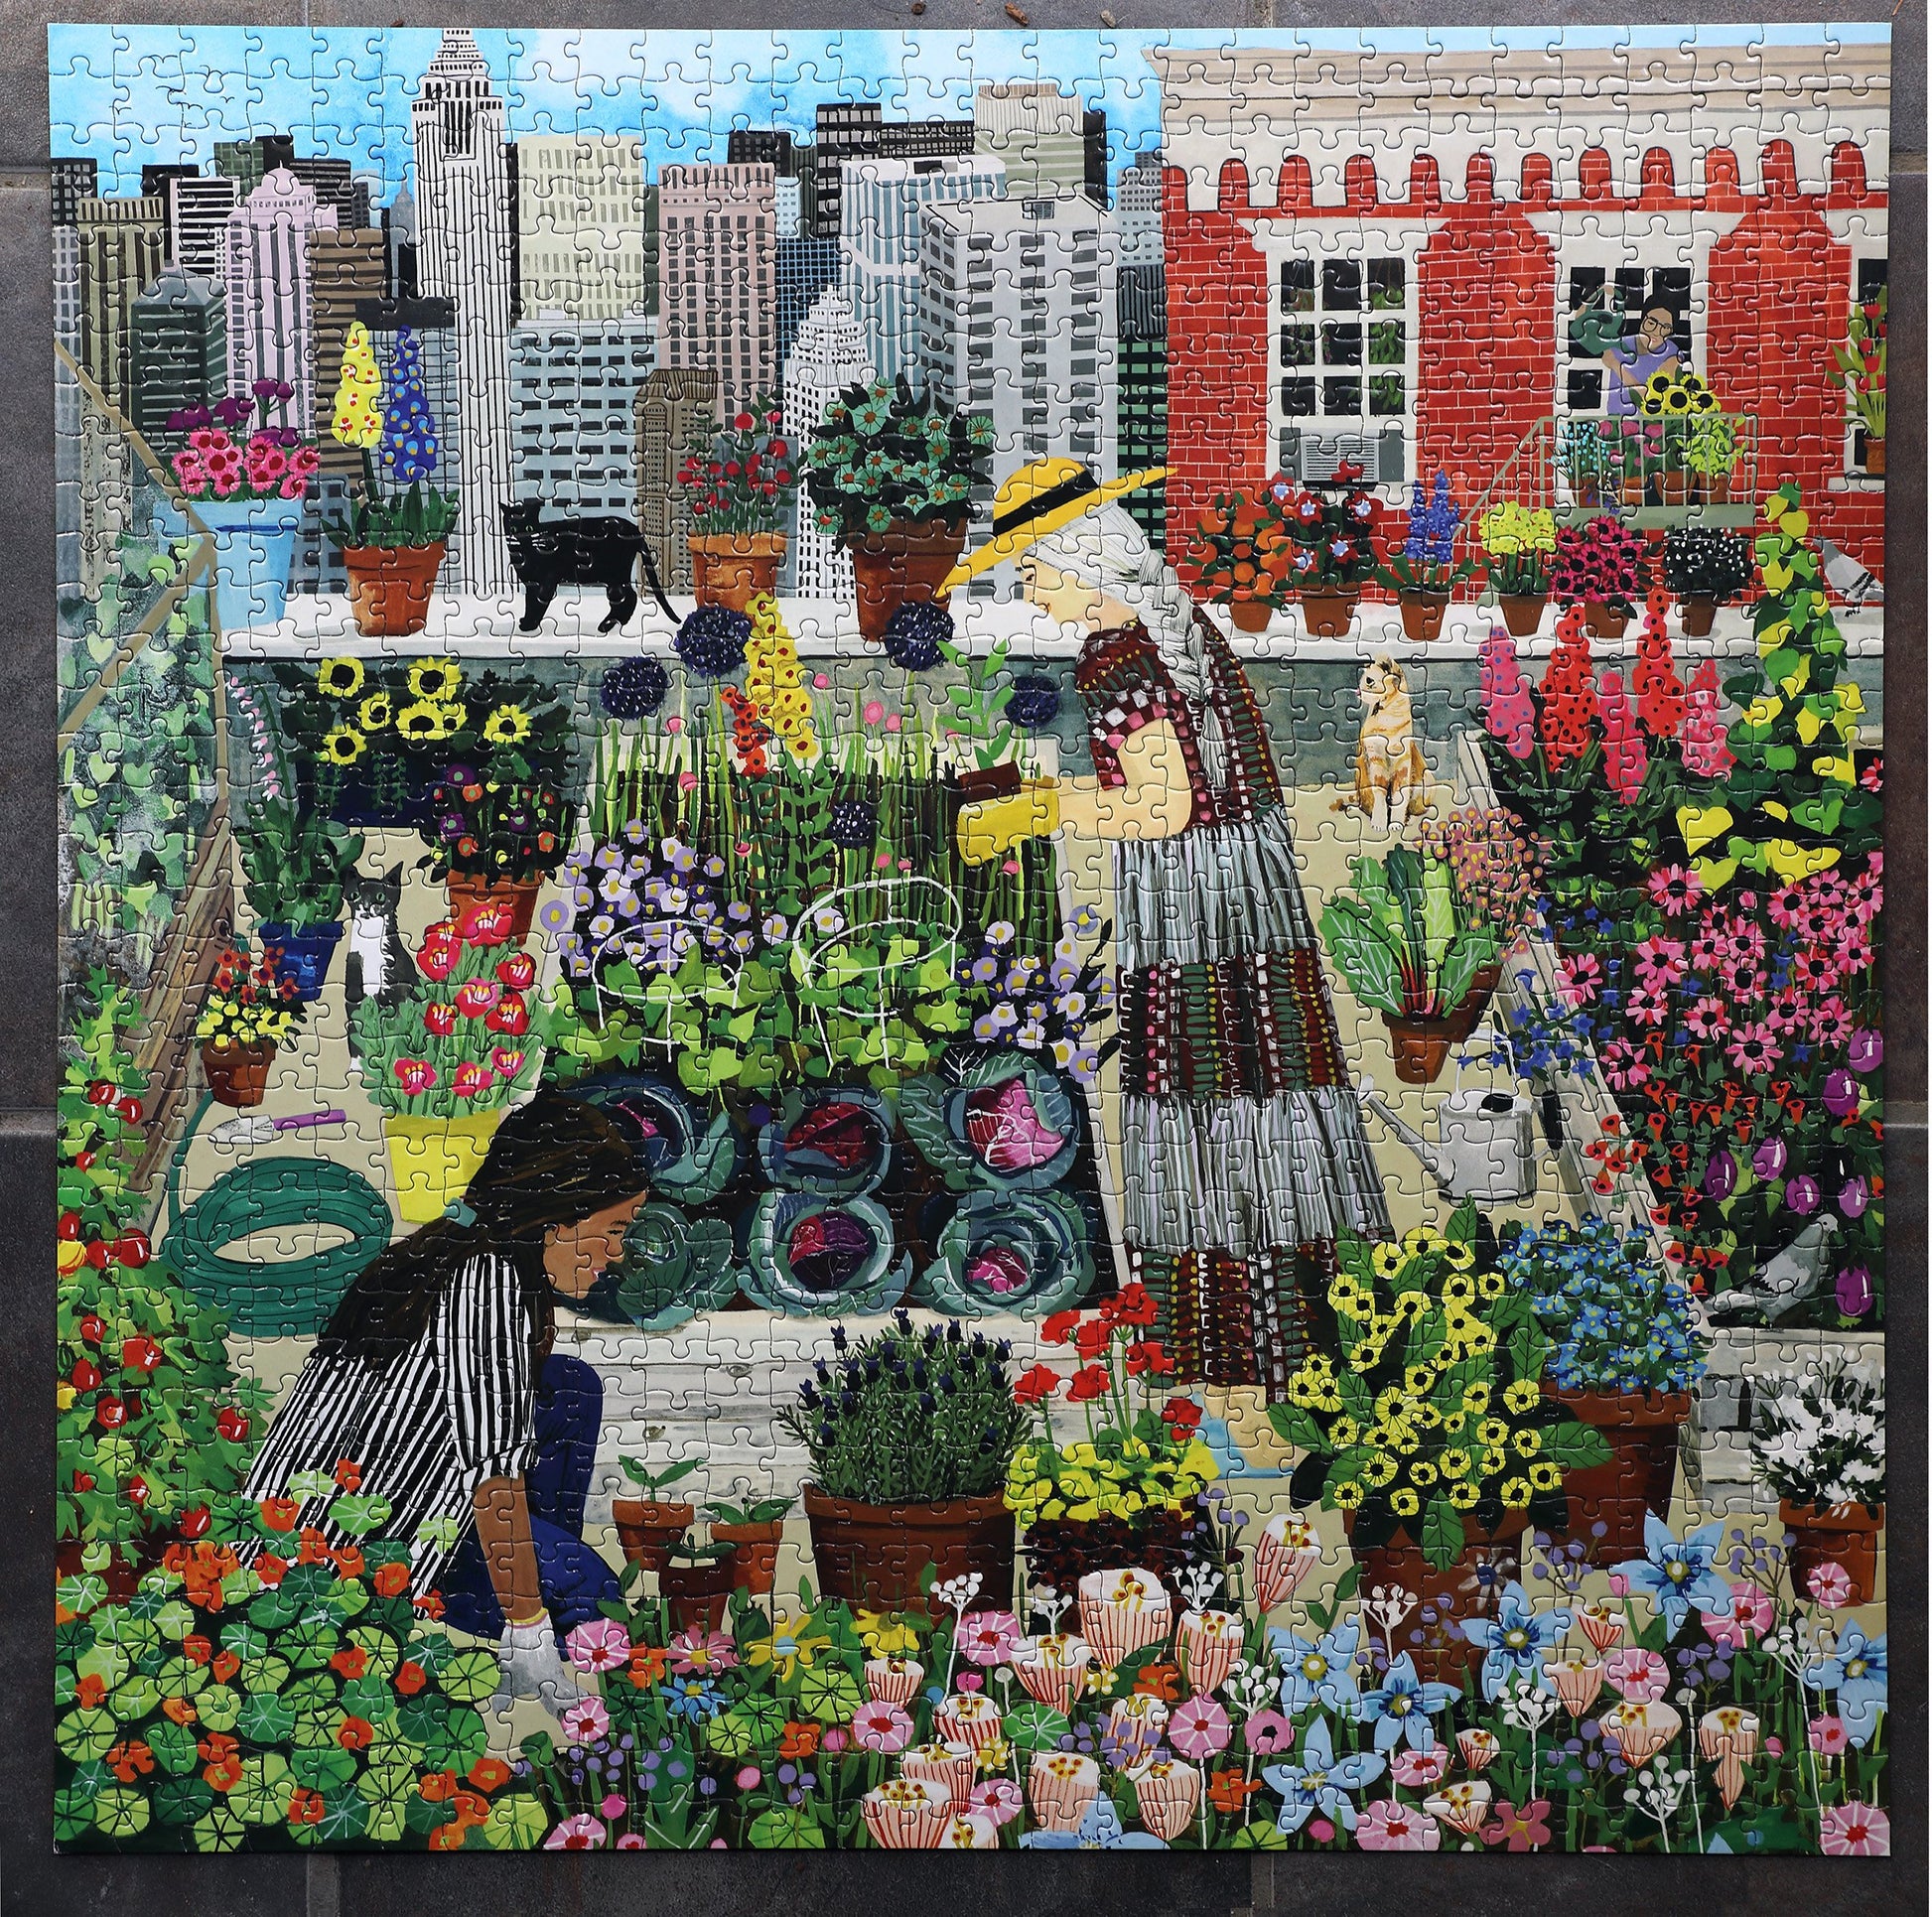 Urban Gardening 1000 Piece Jigsaw Puzzle eeBoo Piece & Love Puzzles for Adults Gifts for Gardeners